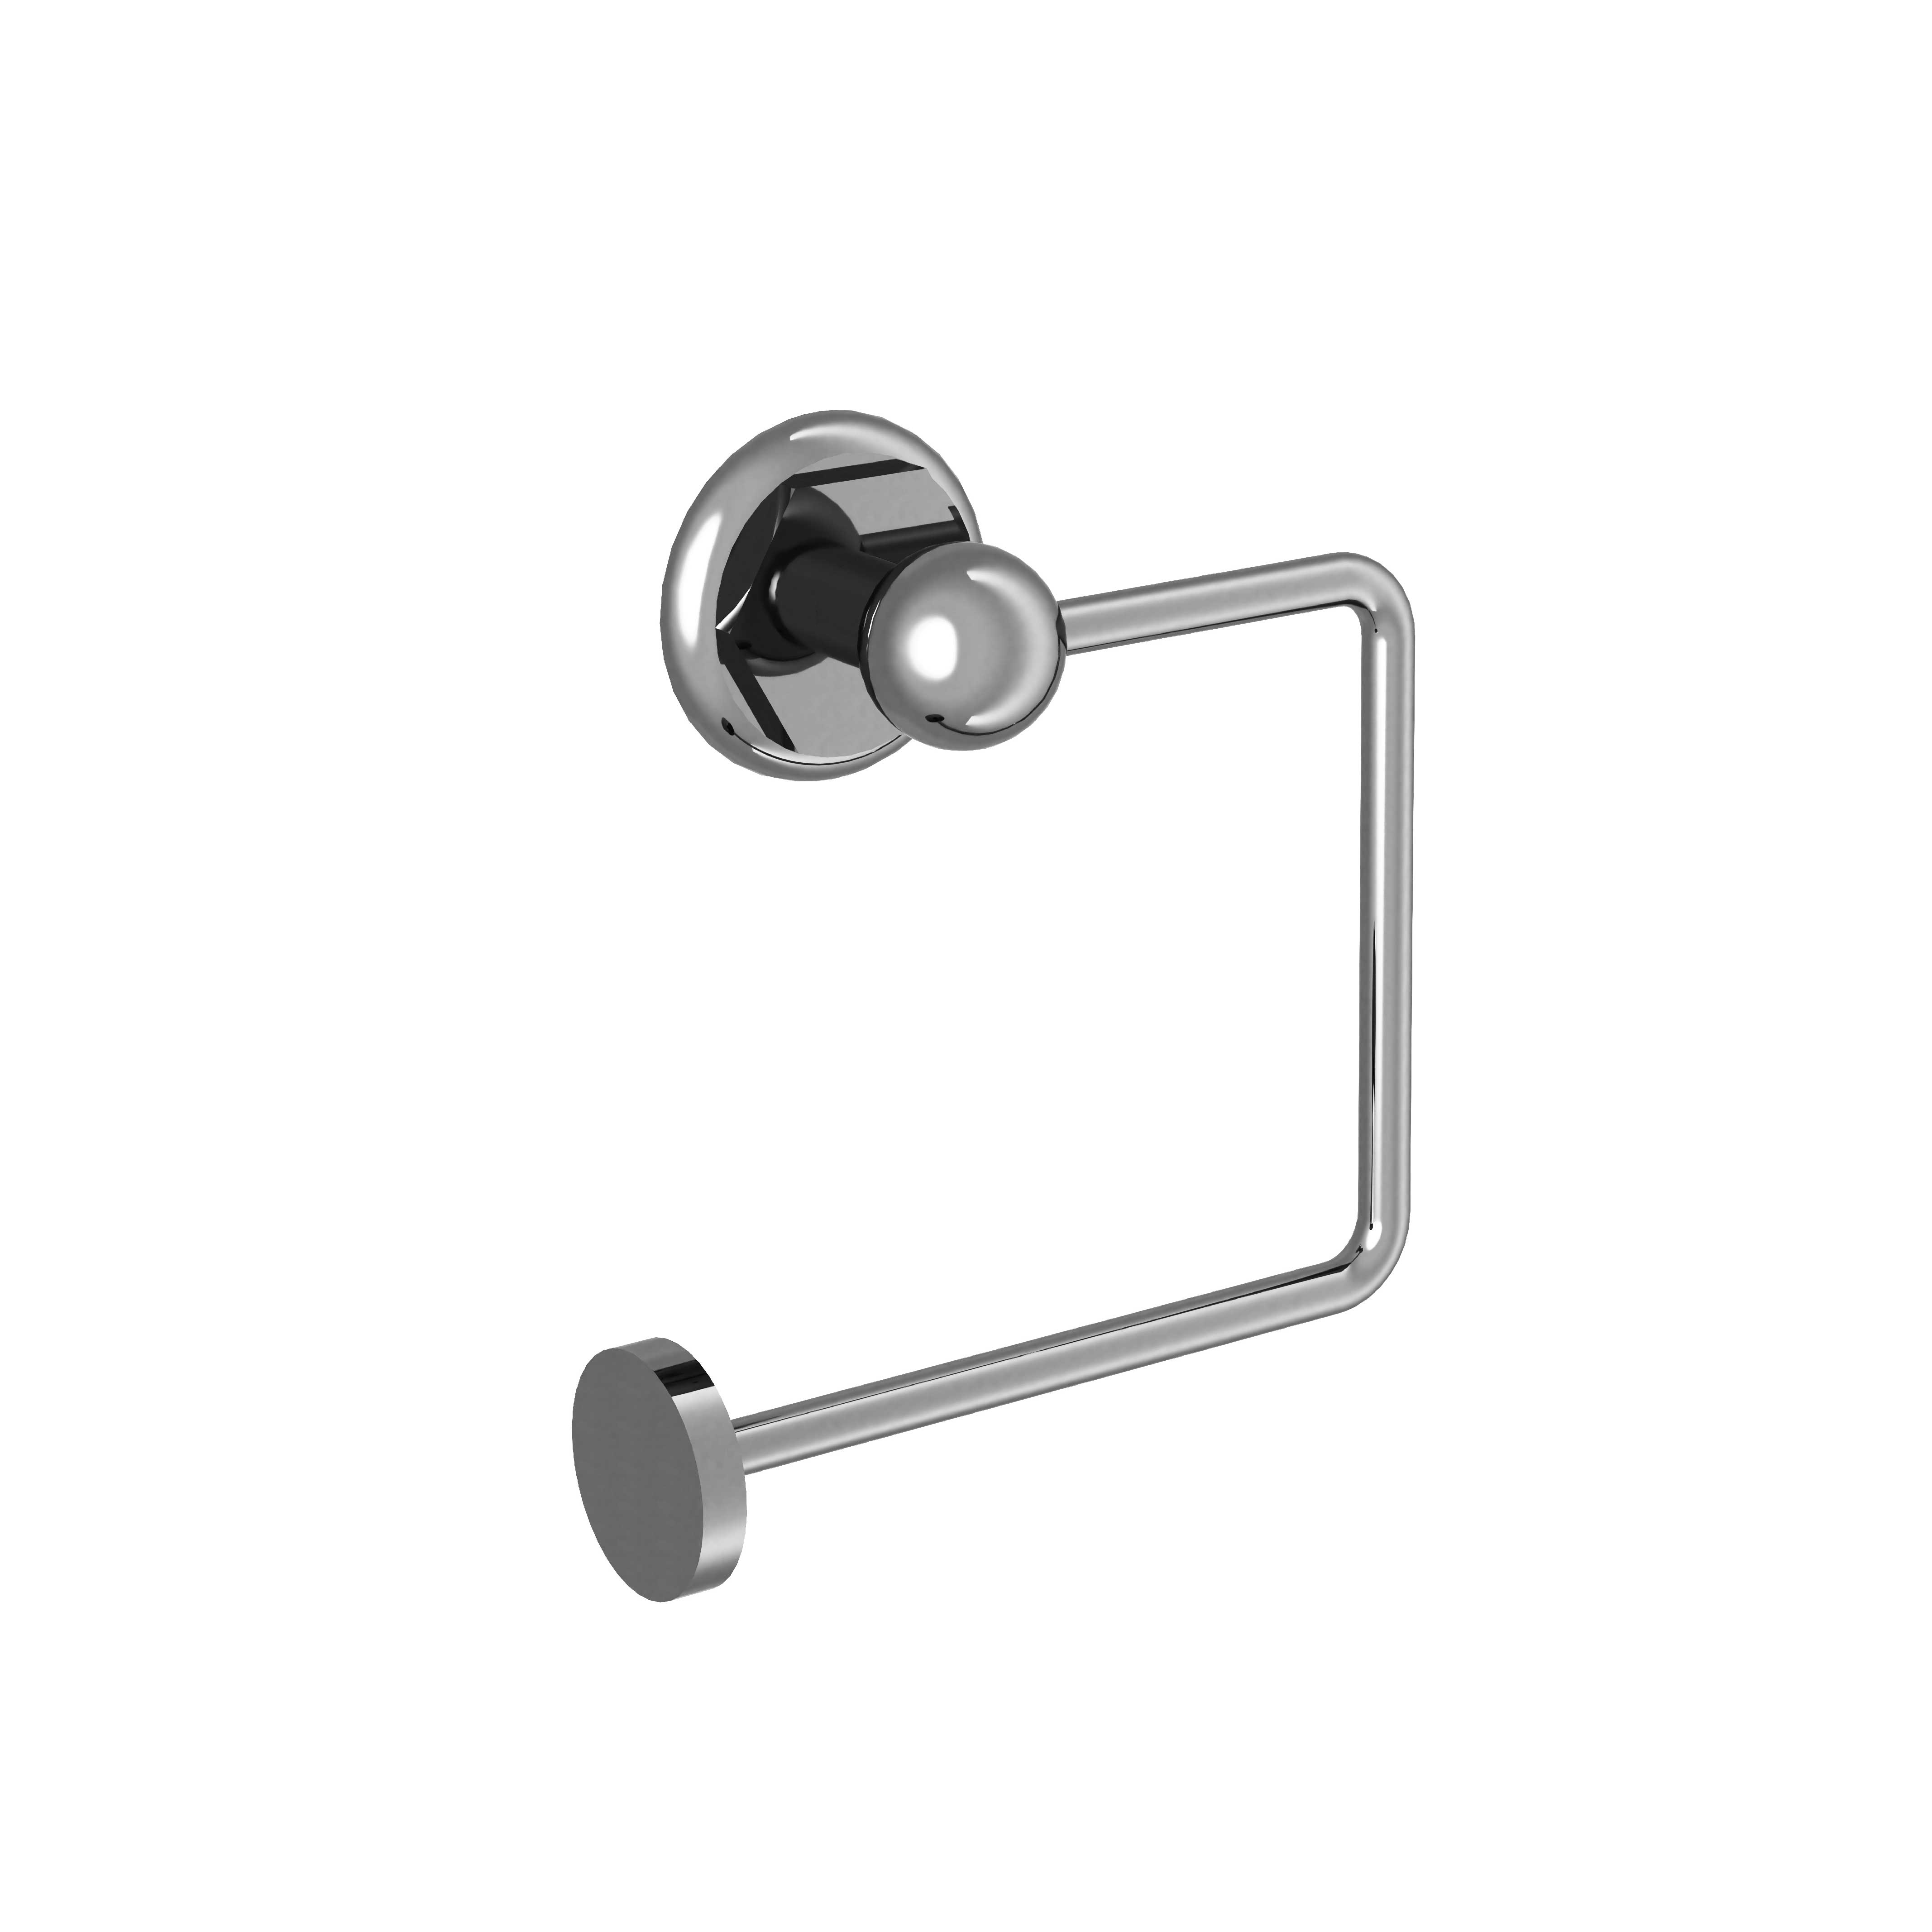 M81-504 Toilet roll holder without cover